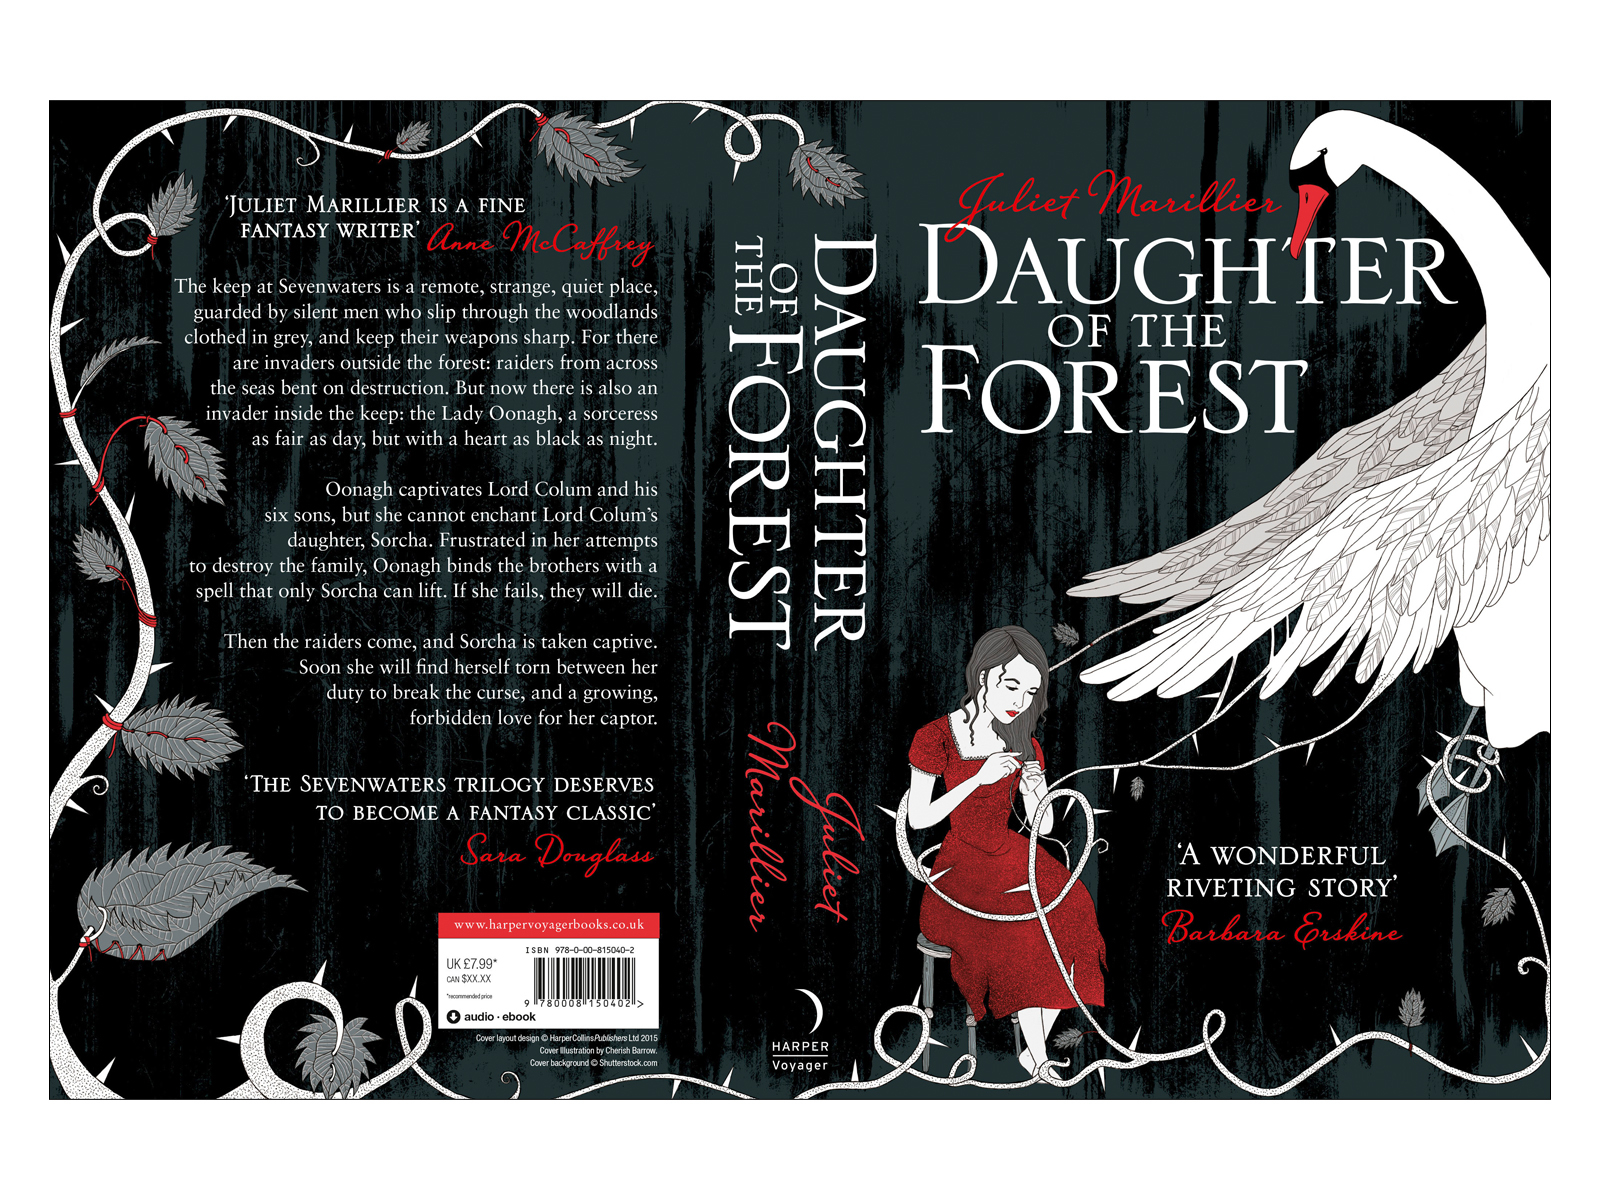 Daughter Of The Forest Killed Cover Design Full Layout By Cherie Chapman On Dribbble